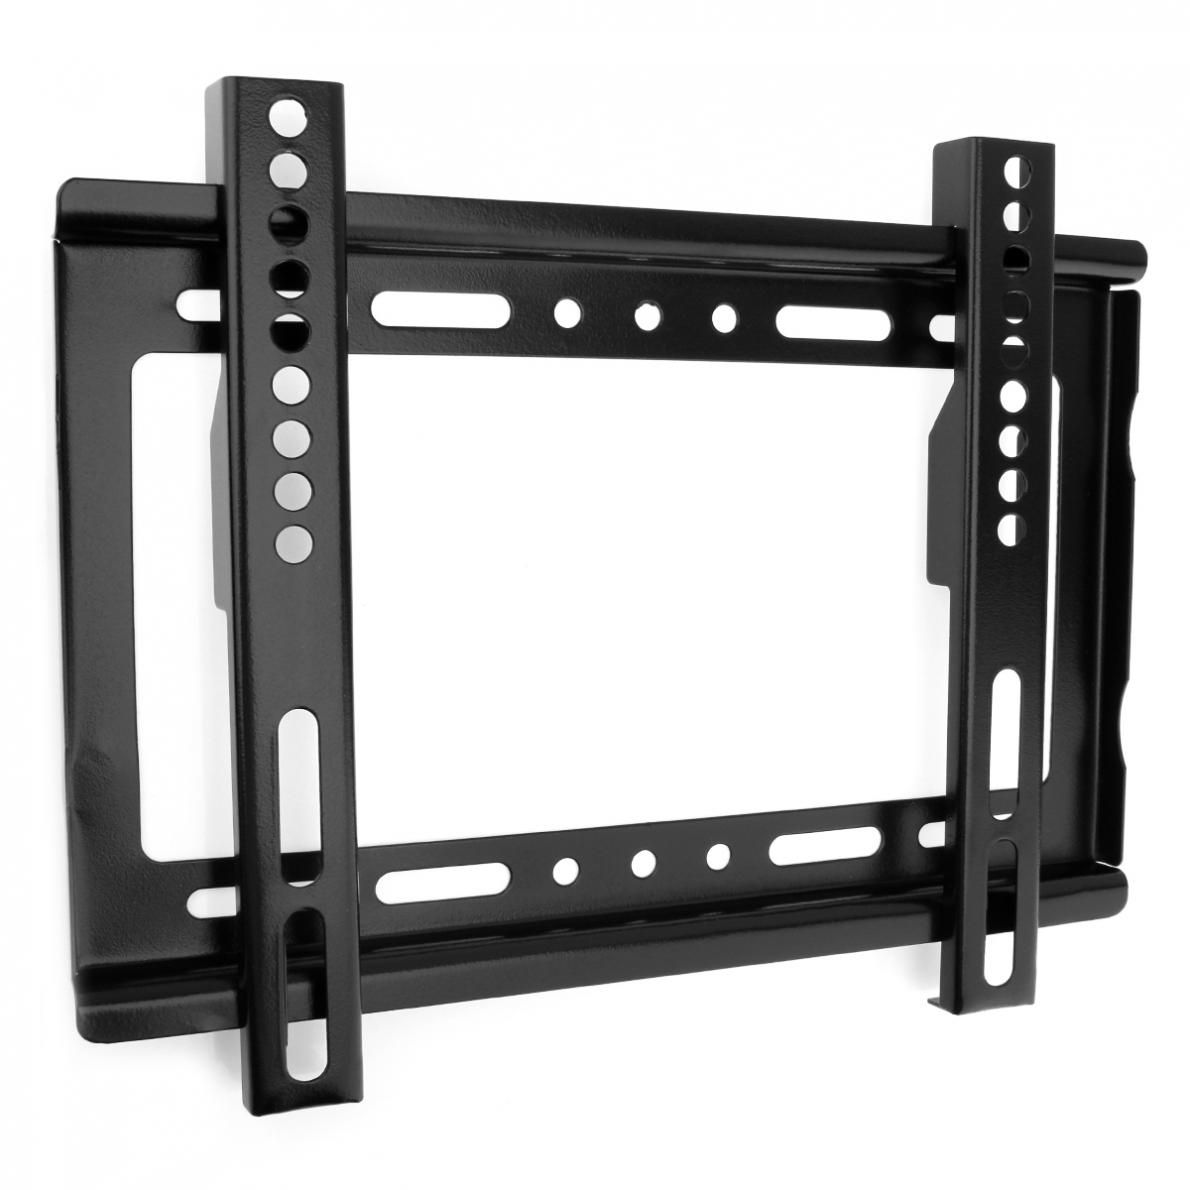 Hot Sales! Universal Tv Wall Mount Bracket For Most 14 With Regard To Wall Mounted Tv Stands For Flat Screens (View 4 of 15)